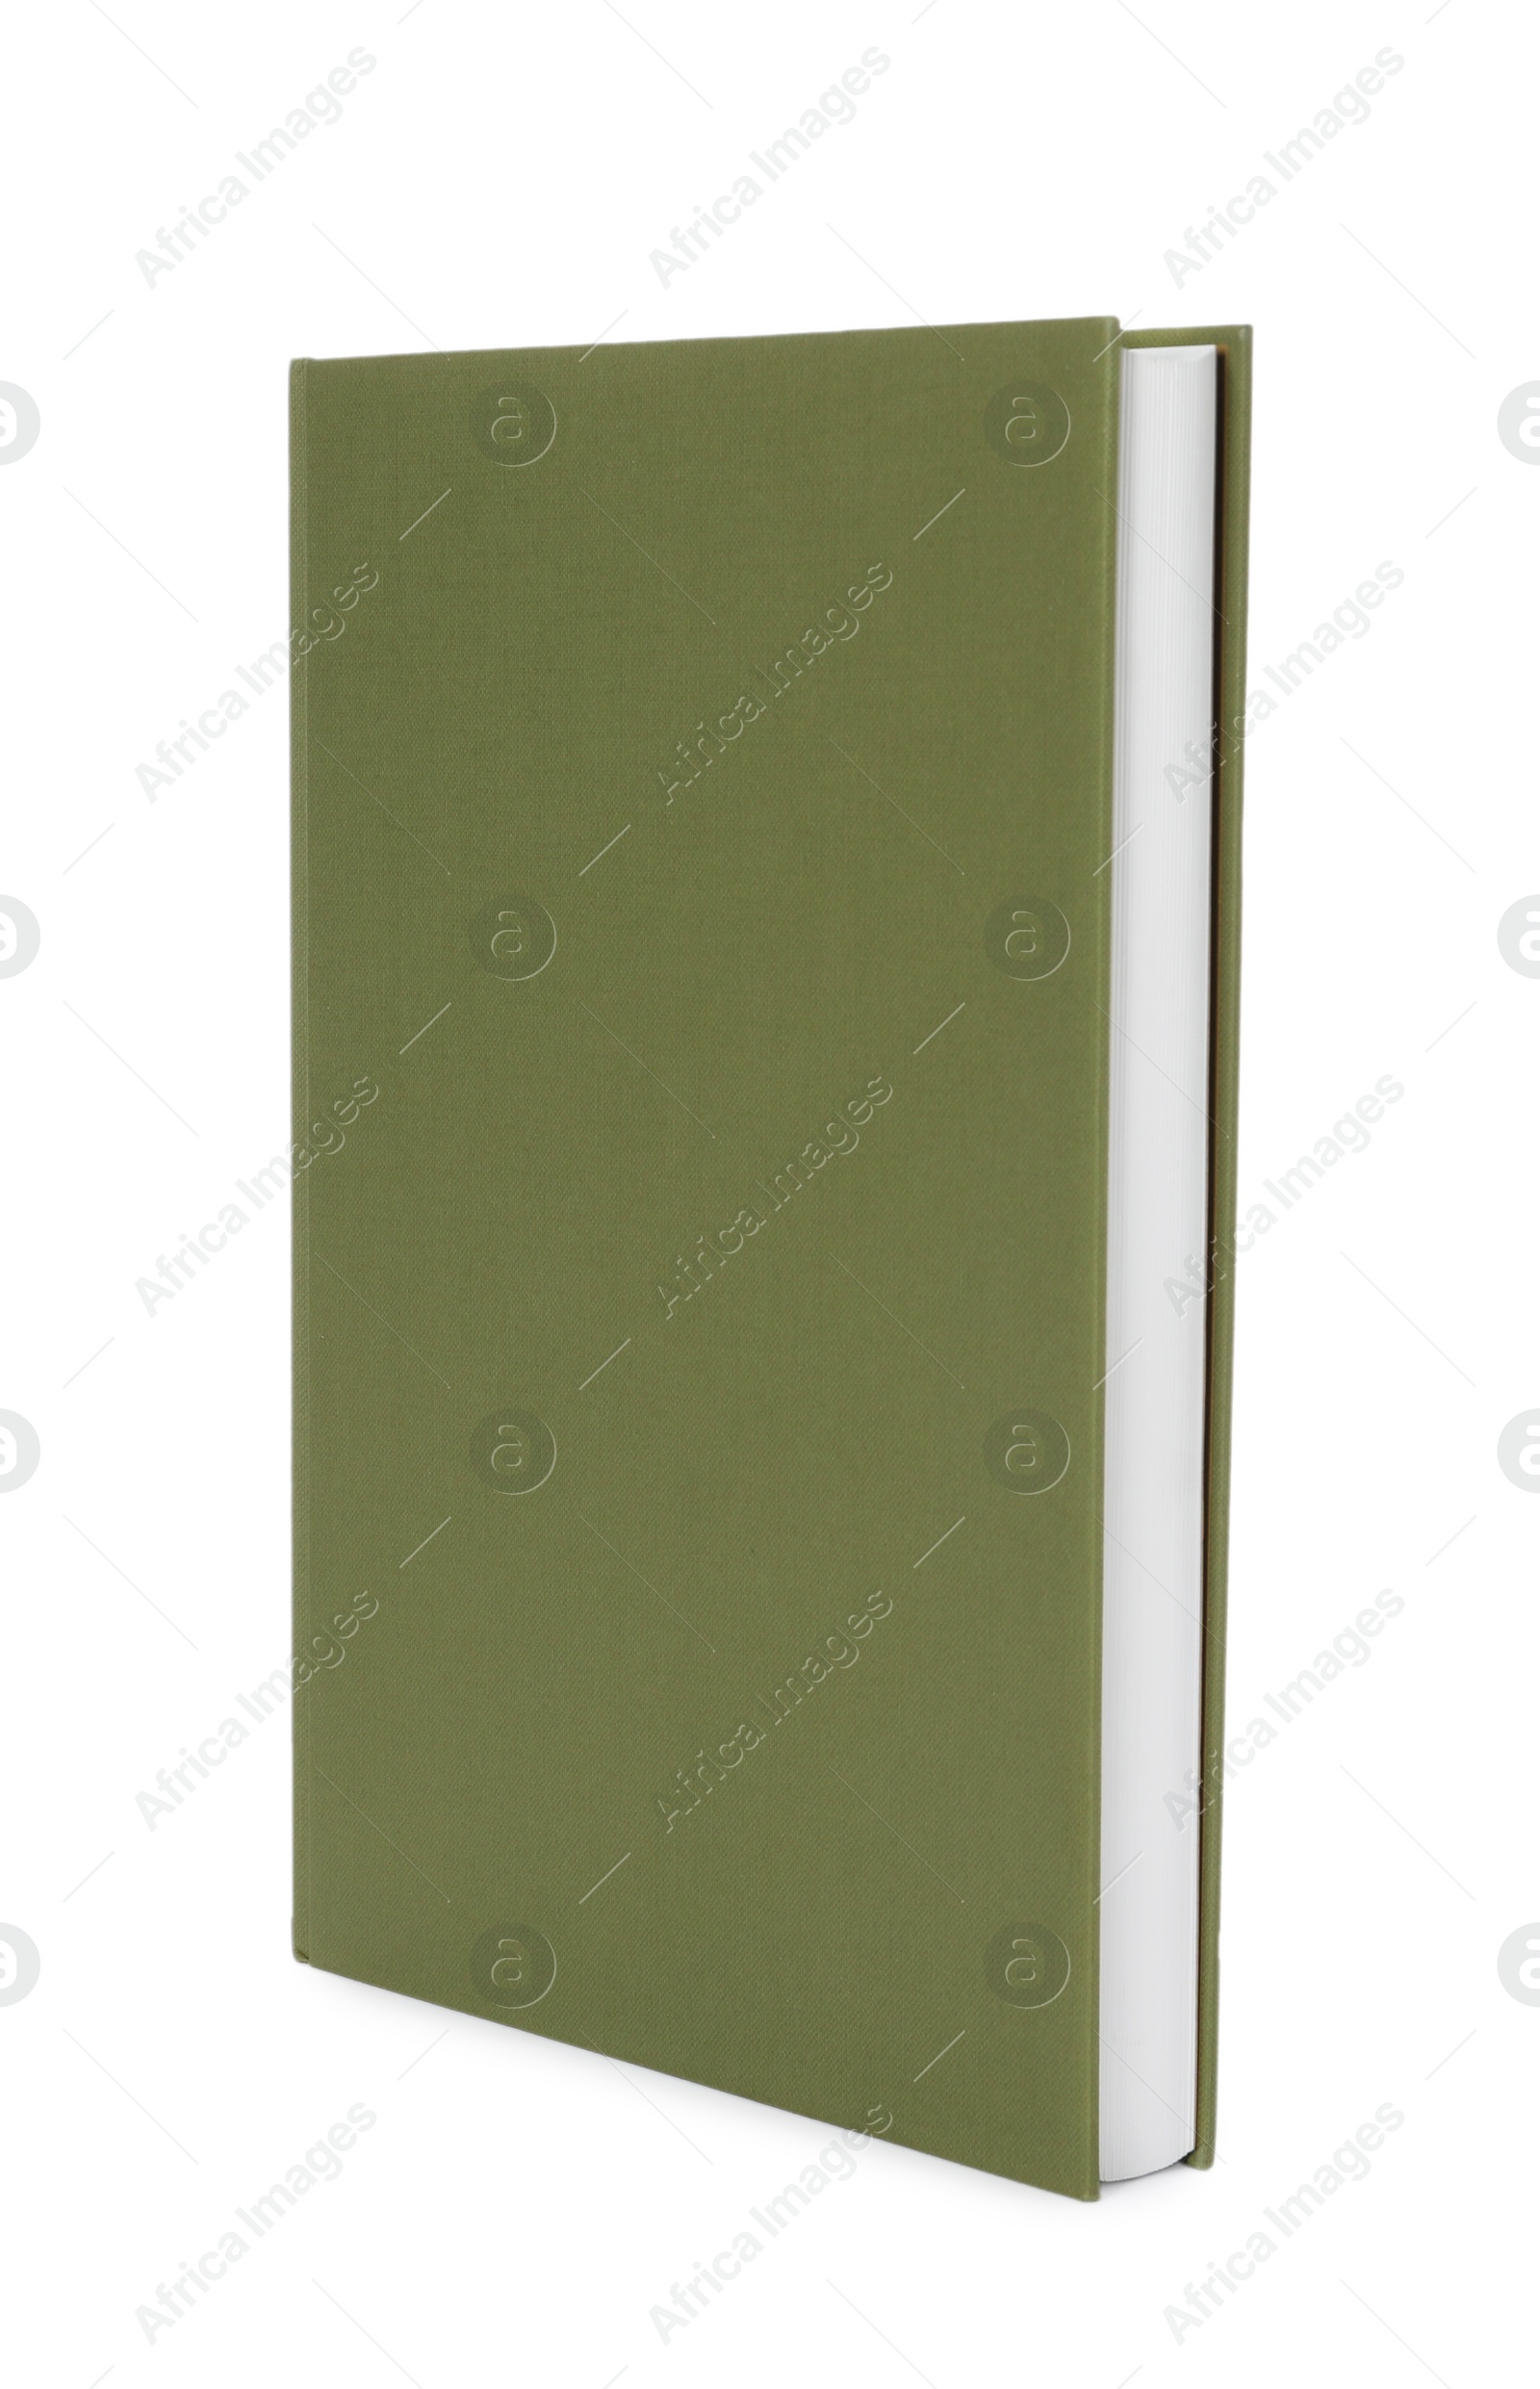 Photo of Closed book with olive hard cover isolated on white